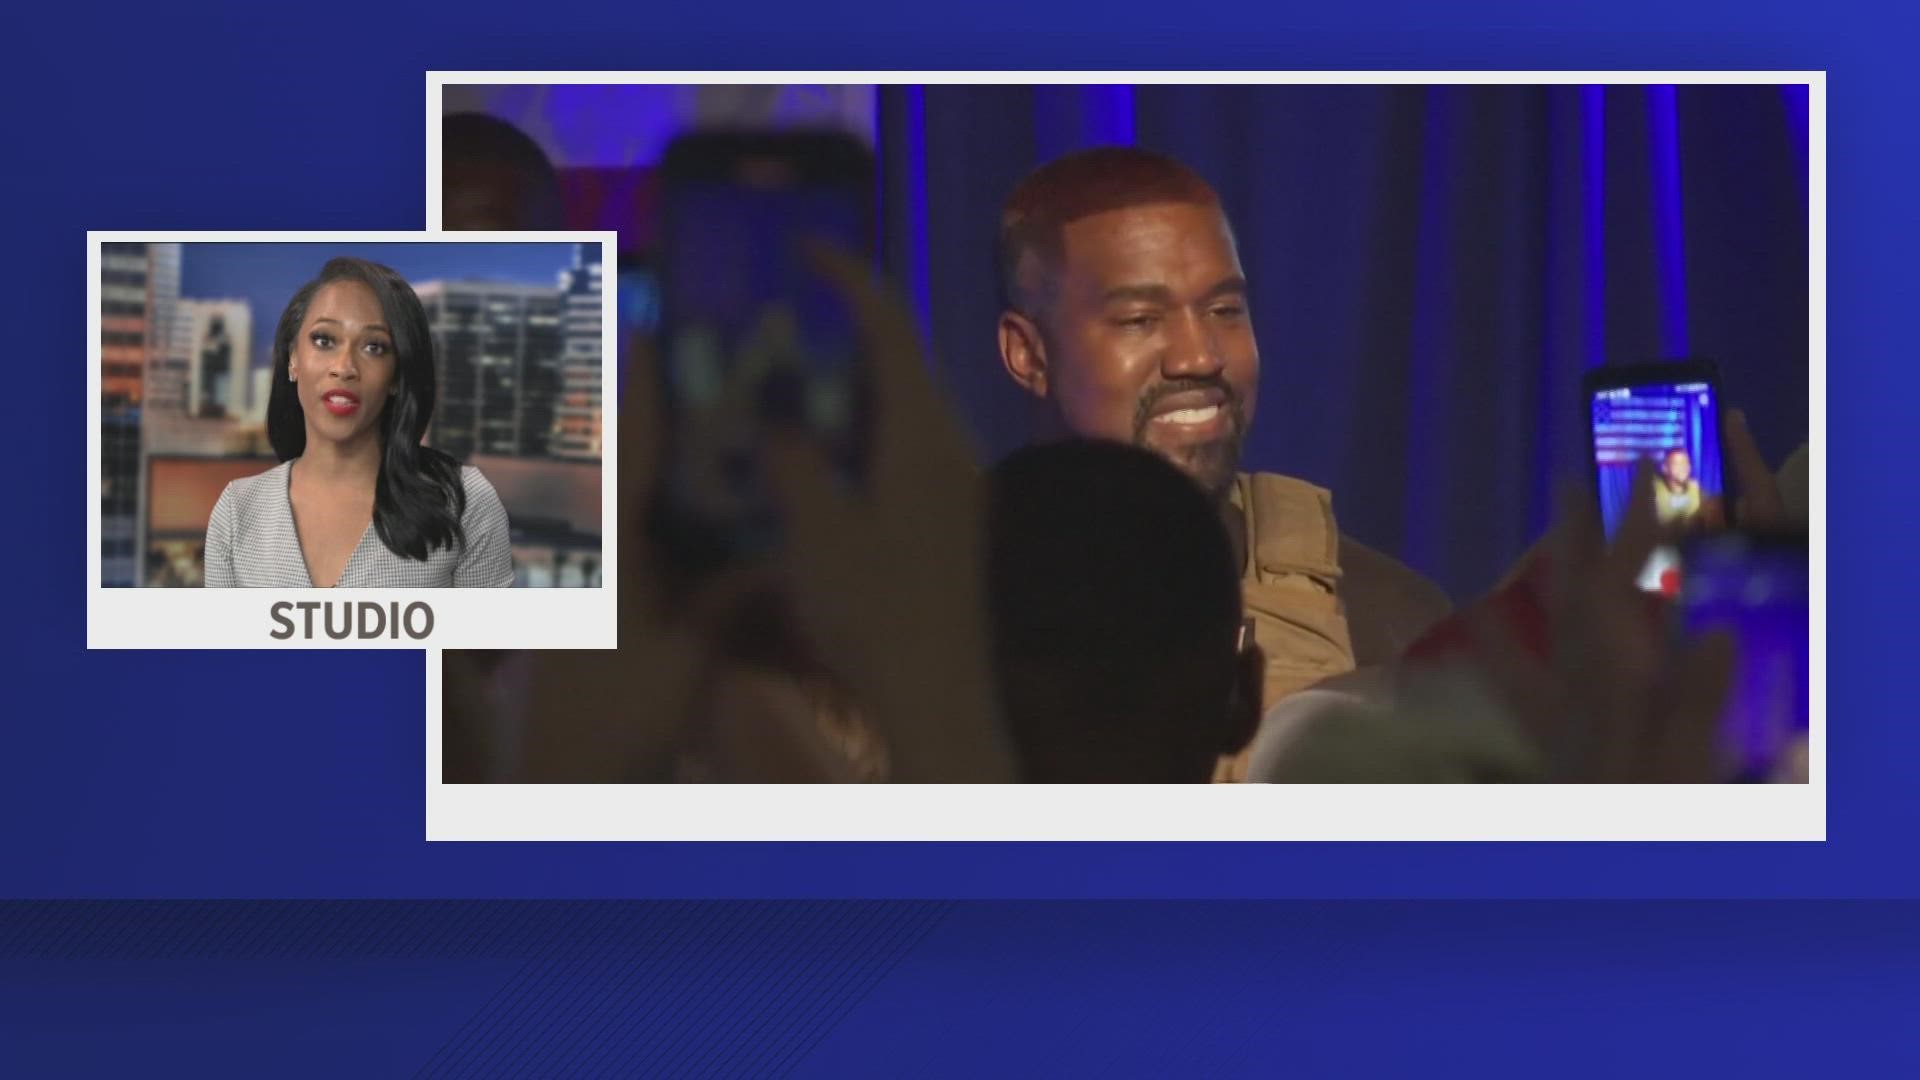 The comments were made during an interview Kanye West did on a podcast, "Drink Champs," that has since been removed.